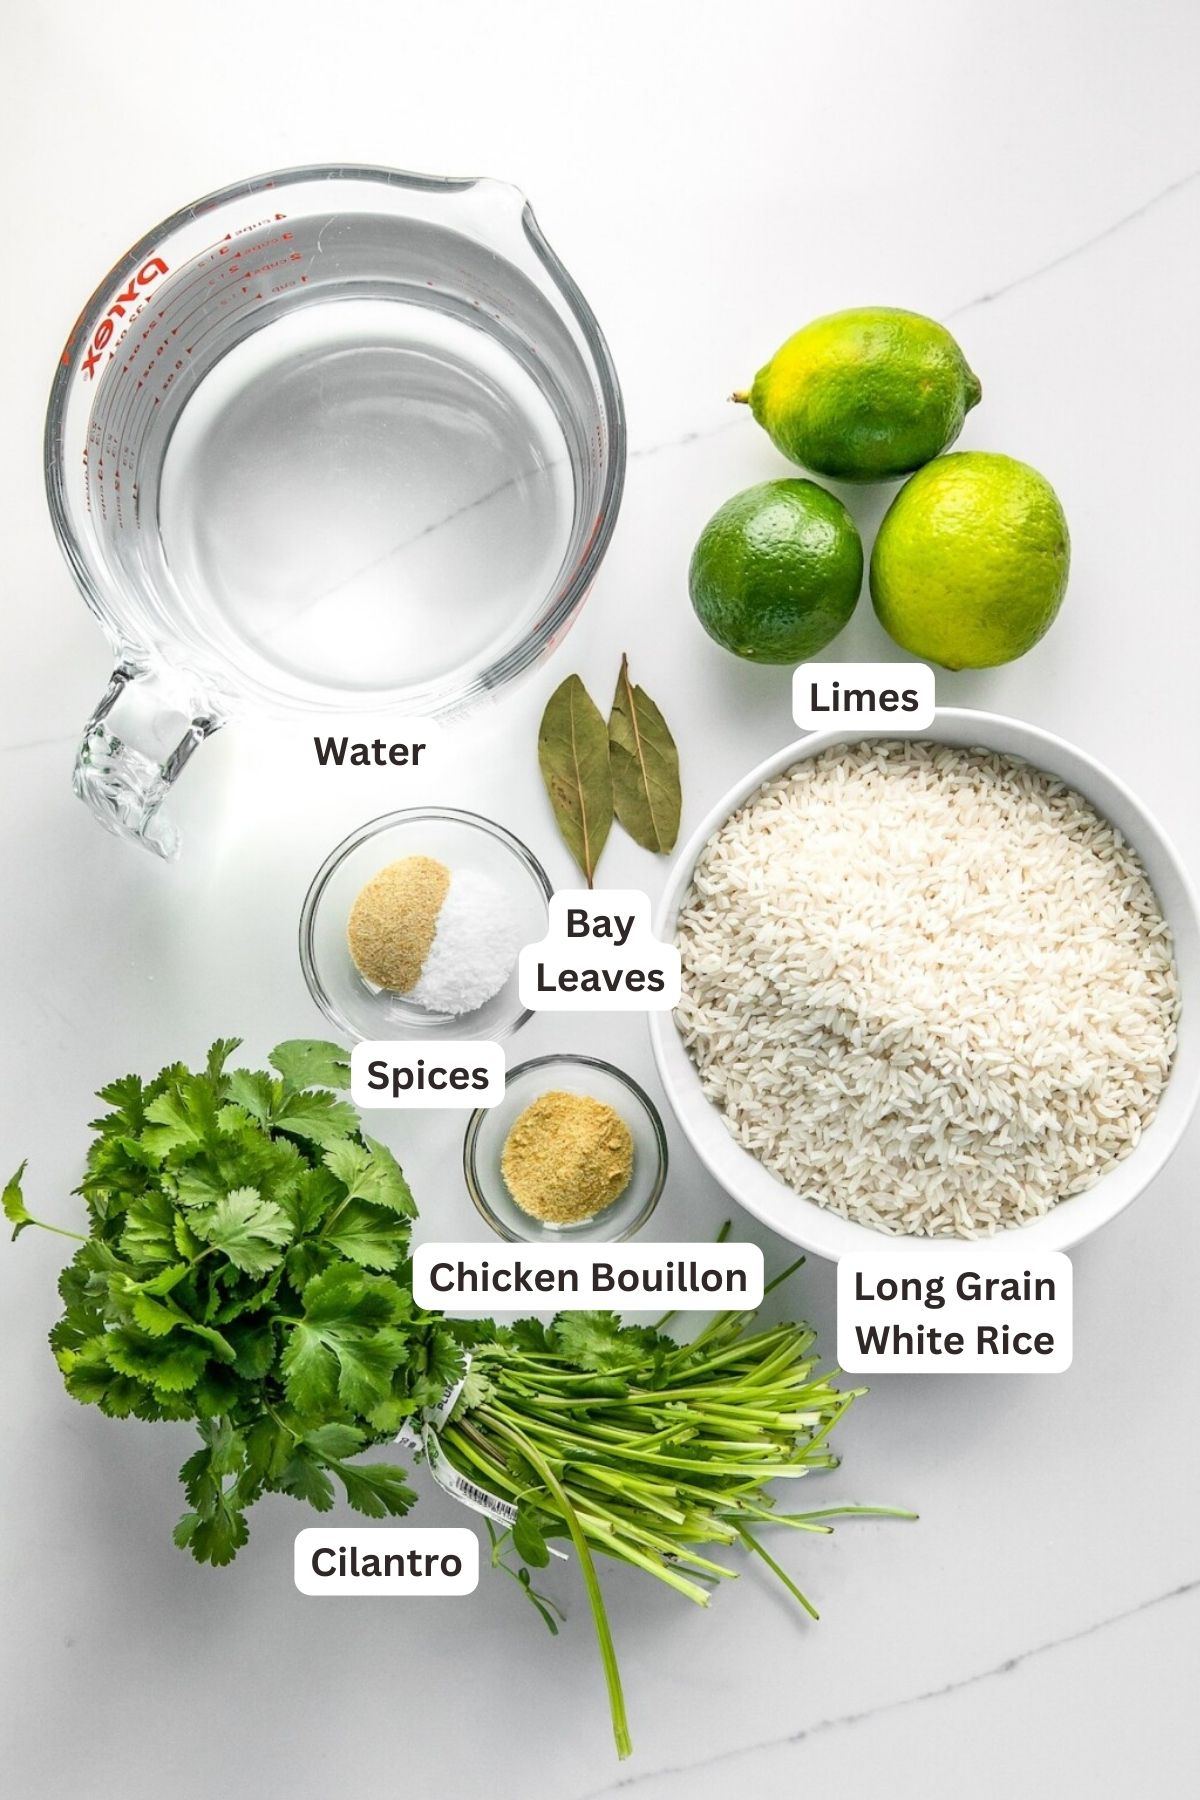 Ingredients for Cilantro Lime Rice.